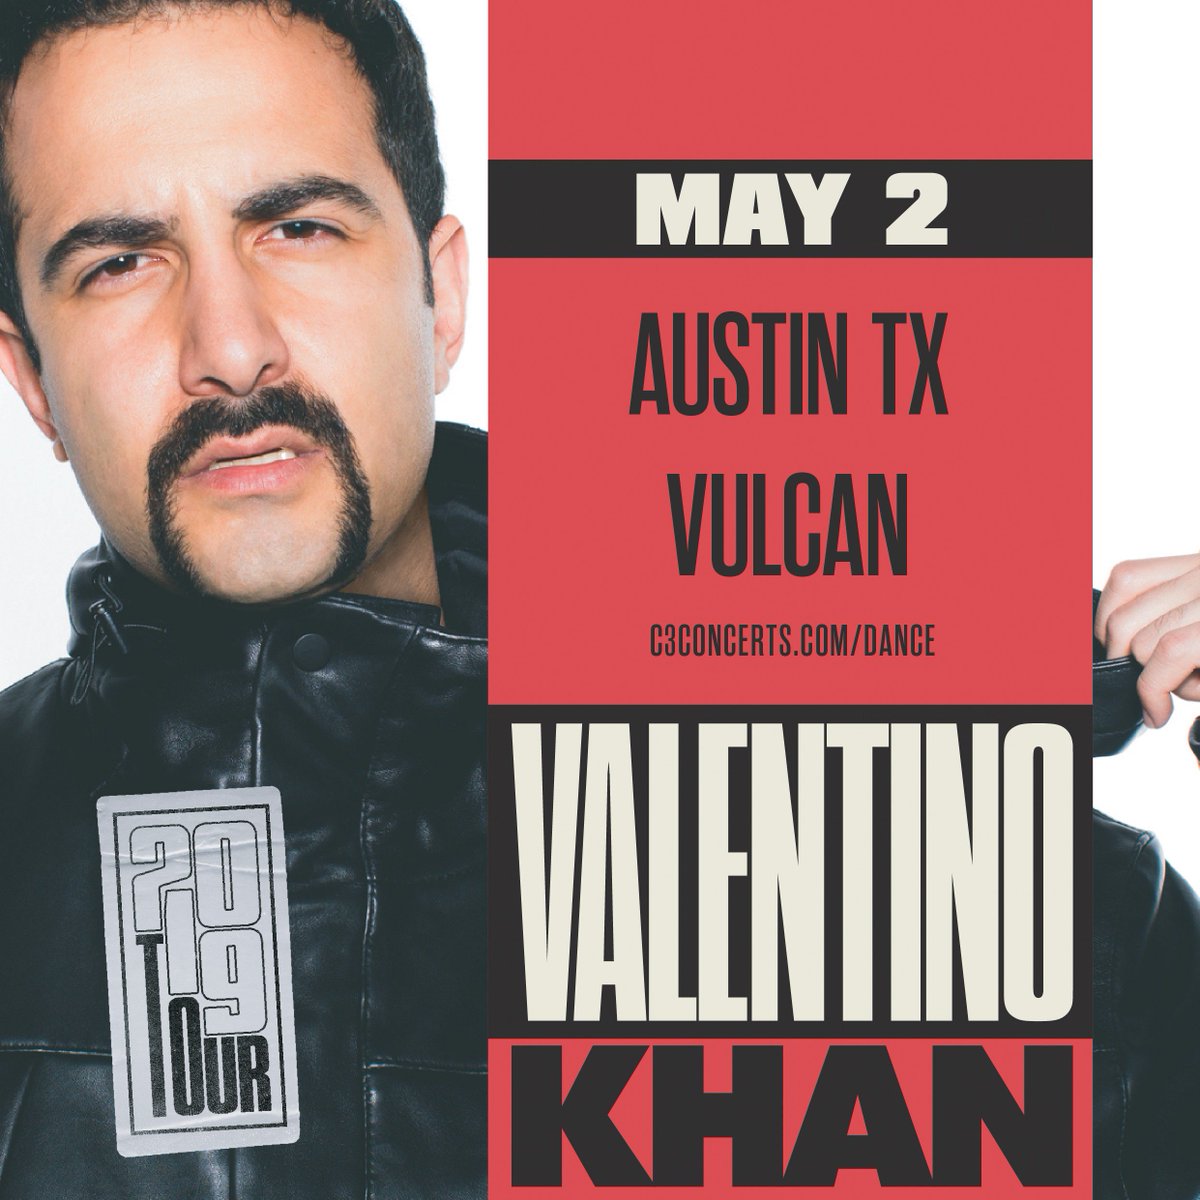 MAY 2 IS GETTING CLOSER! And so is partying with @ValentinoKhan at Vulcan. Low Ticket Warning 🔥 bit.ly/Valentino_Khan…